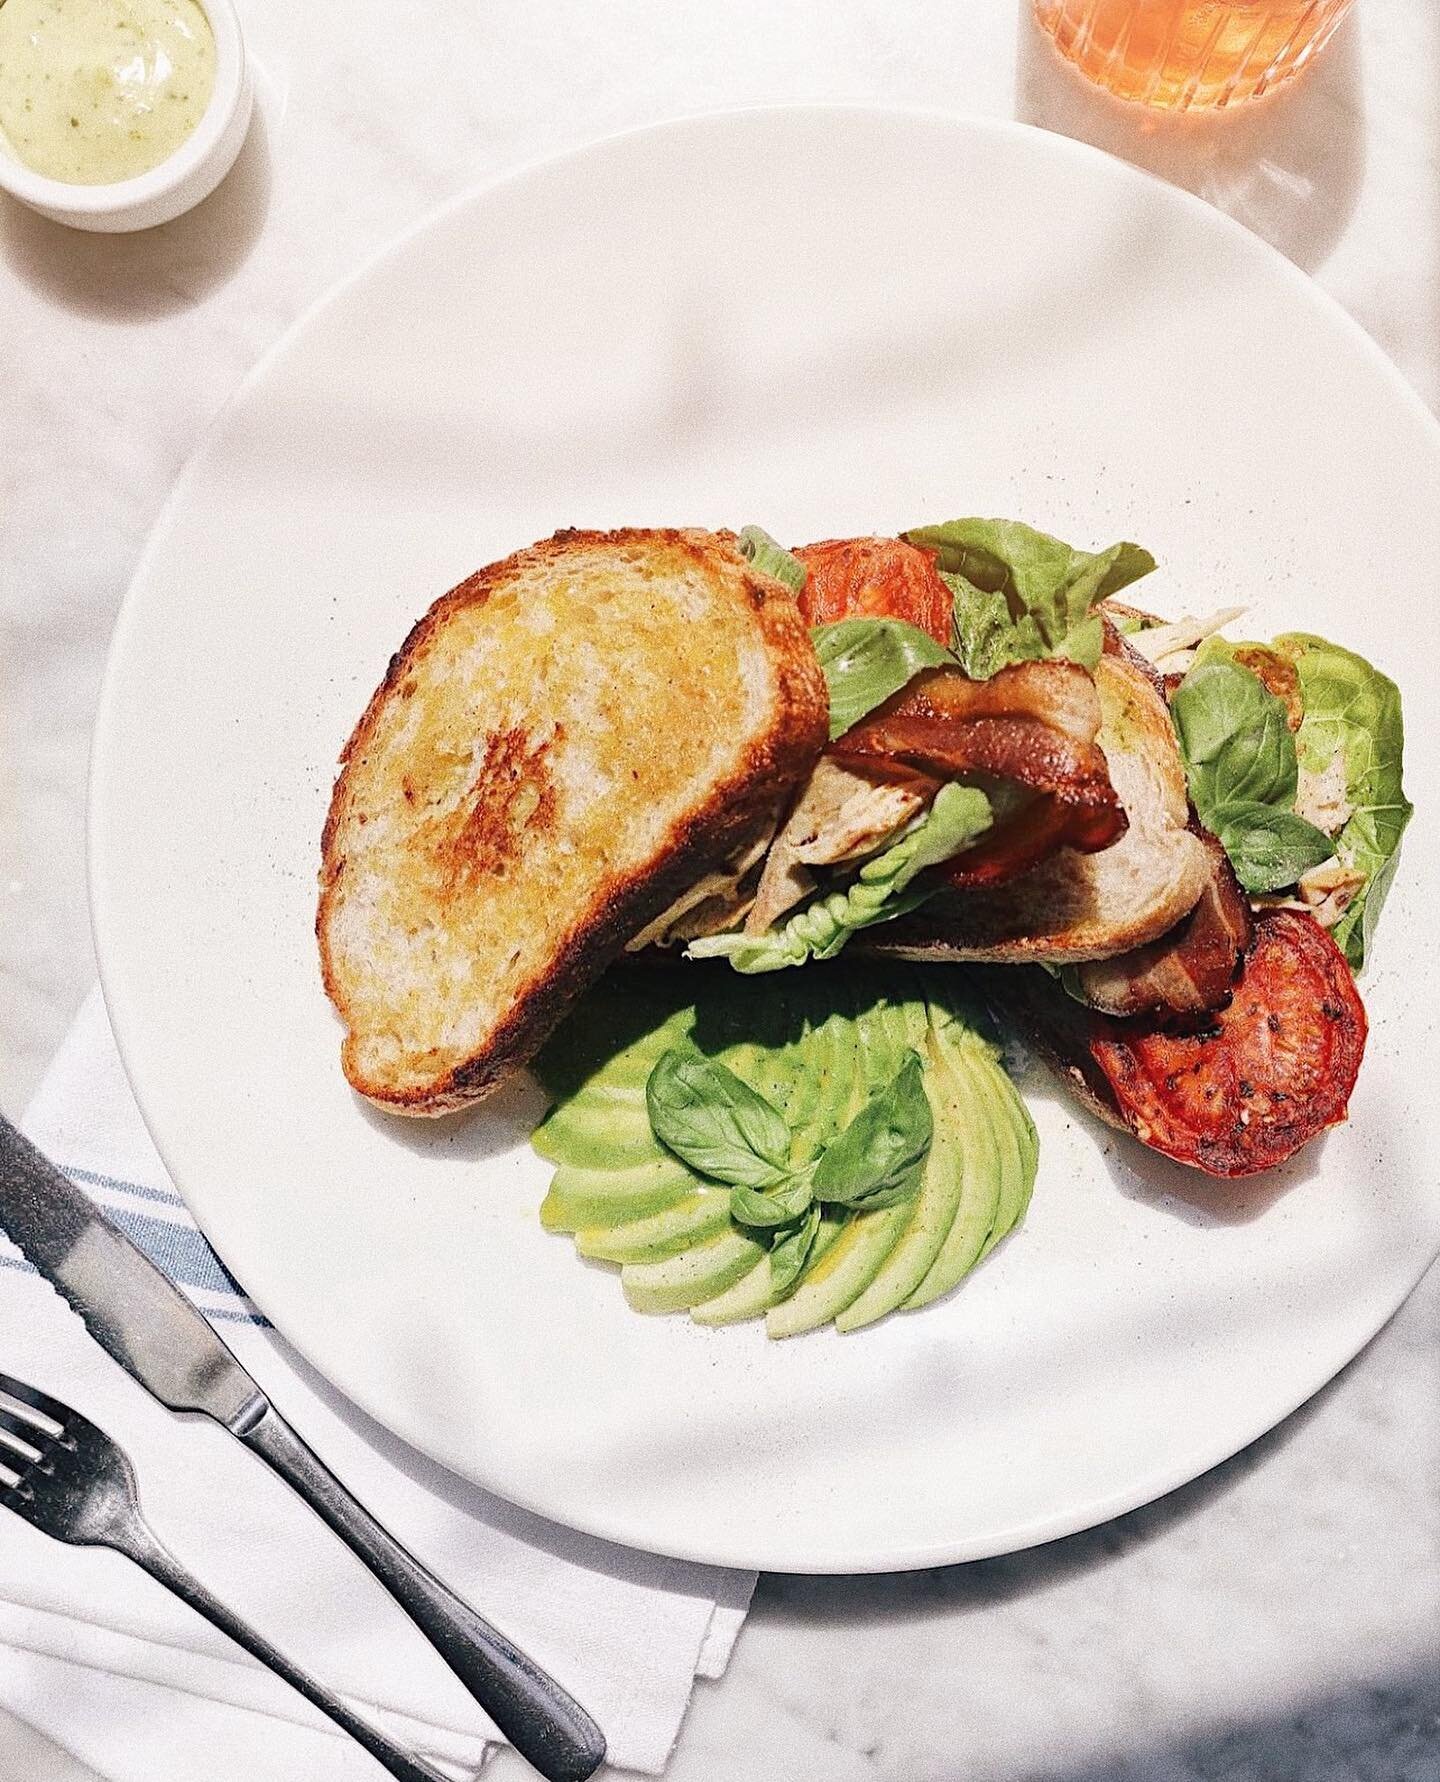 Sunday lunches never looked so good ✨💫 Our House Club with free range chicken, smoked bacon, avocado, roasted tomatoes, basil mayo and amazing @wildfarmed grain sourdough 🙌🏼 #TheAddress